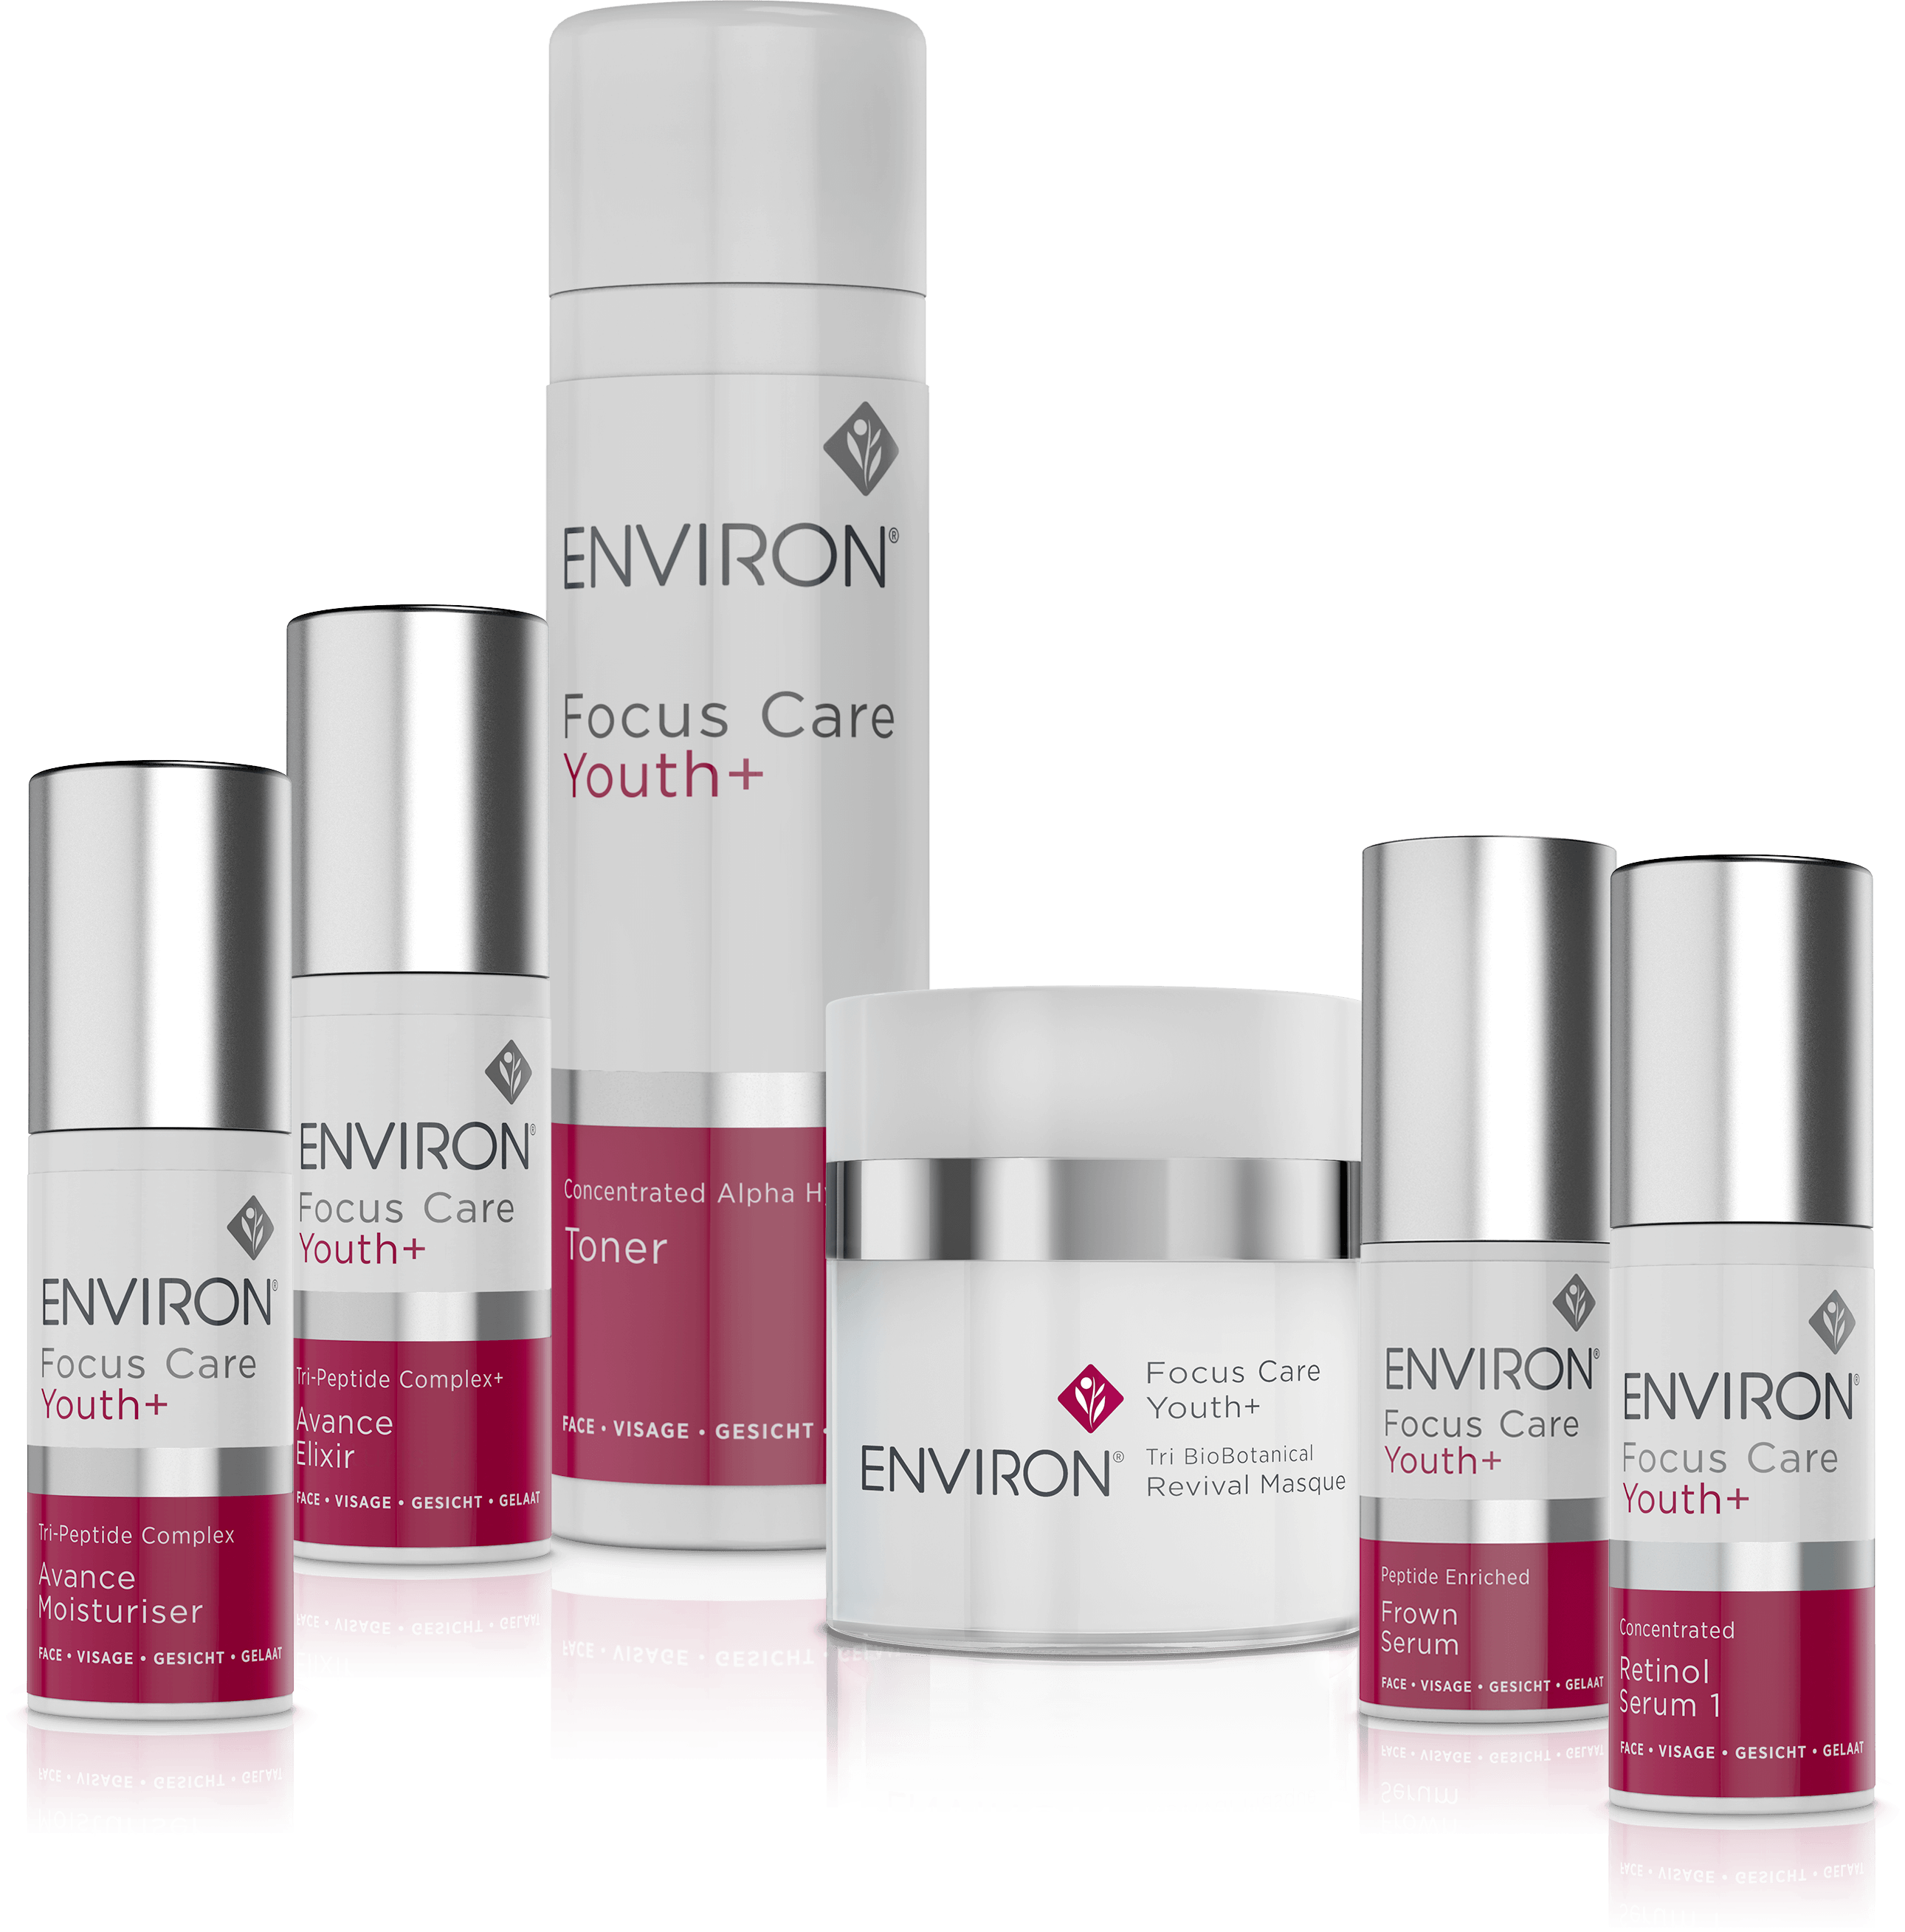 Environ Skincare Products - Professional Skin & Beauty